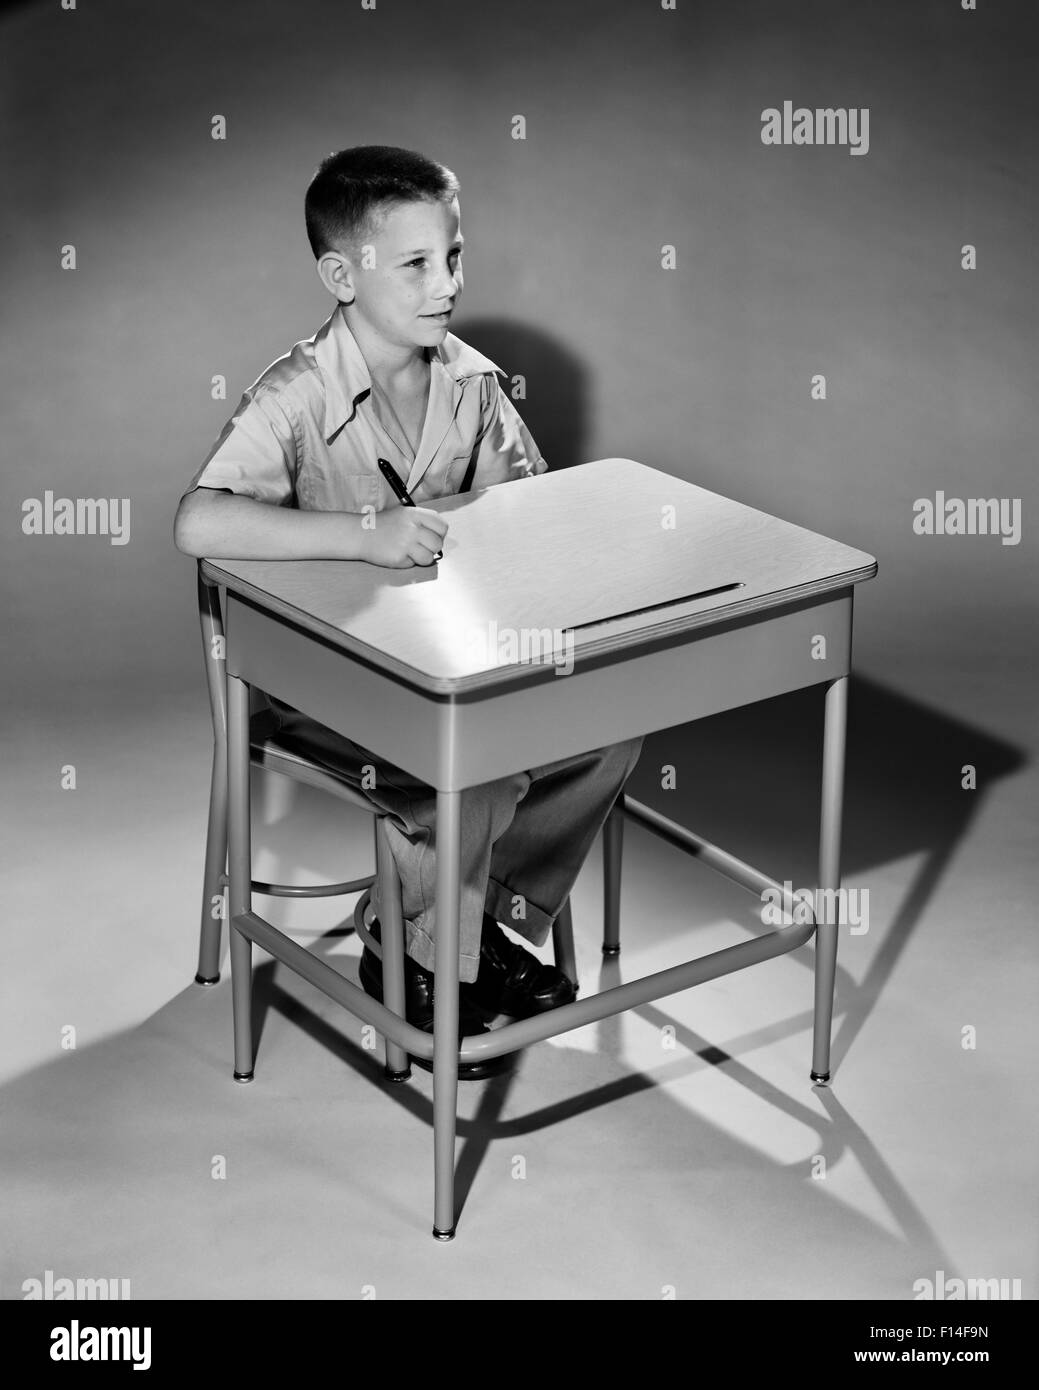 1950s YOUNG BOY HOLDING PEN SITTING AT ELEMENTARY SCHOOL DESK Stock Photo